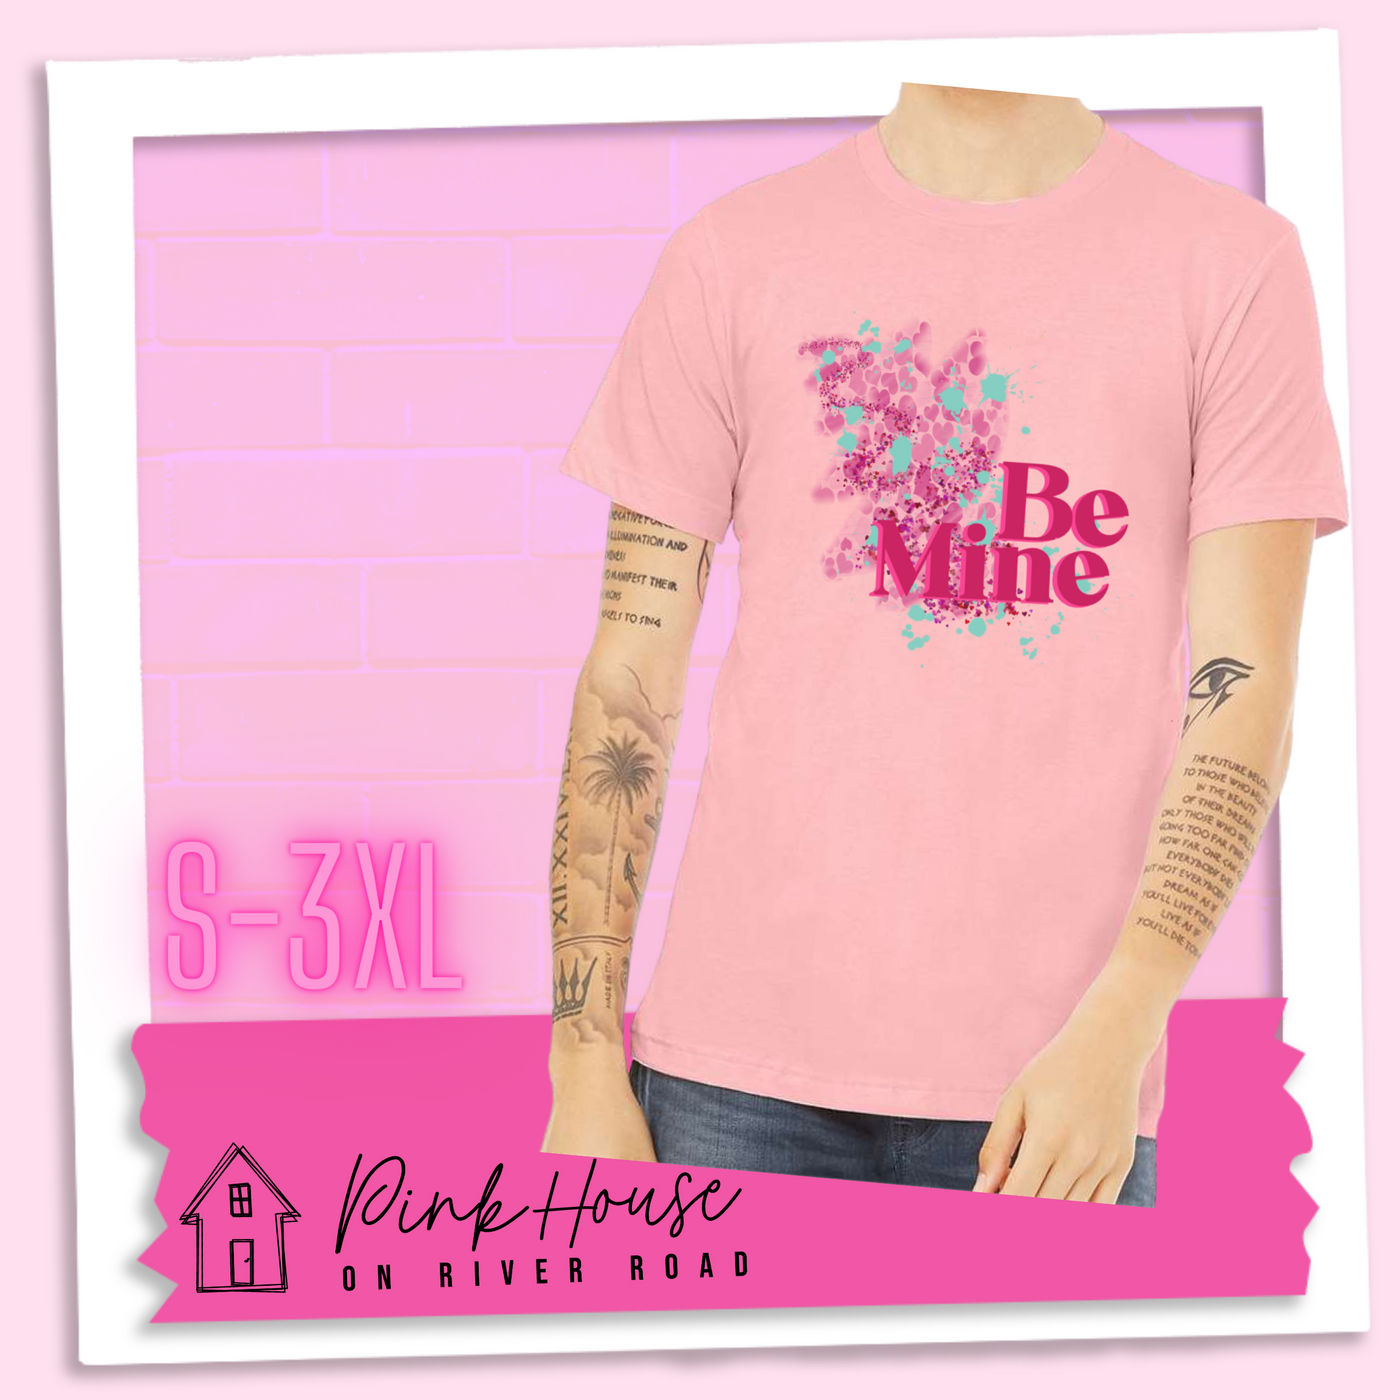  Pink Jersey Tee with a squiggle design made of pink hearts and pink sparkles with light teal splatters and pink text at the end of the art that says Be Mine with a hot pink shadow.